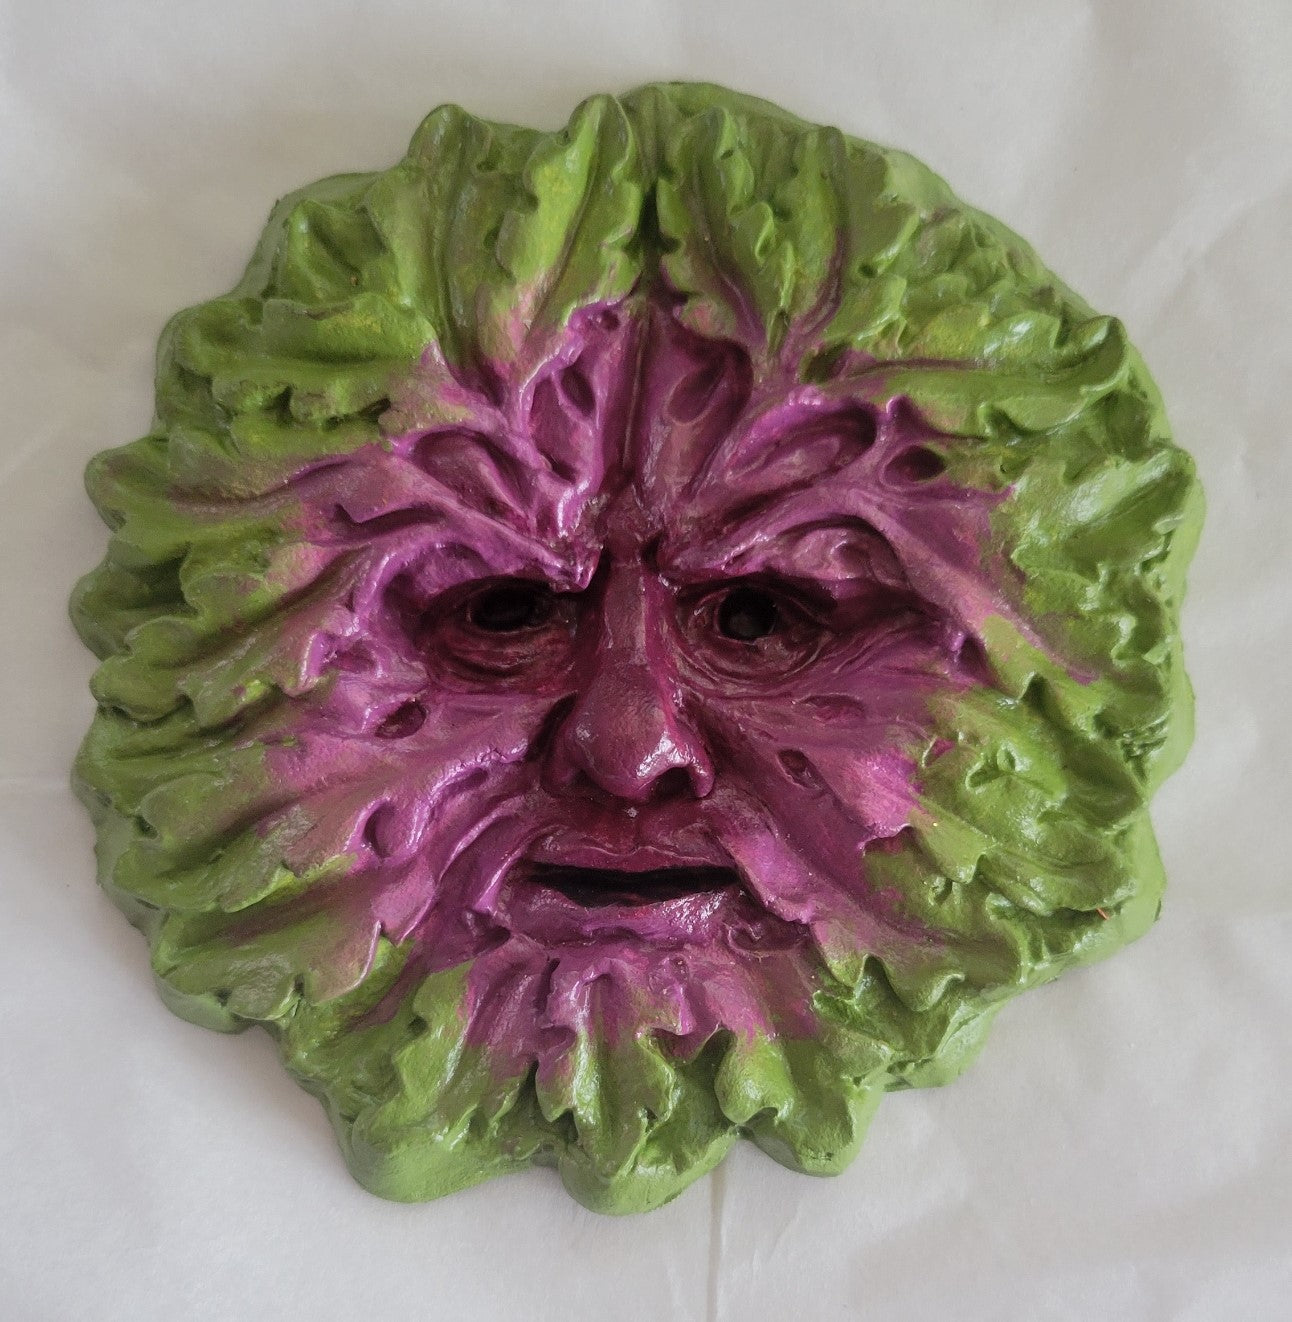 Greenman decoration, Medieval architecture, gifts for history lovers, handmade. Cabbage colors